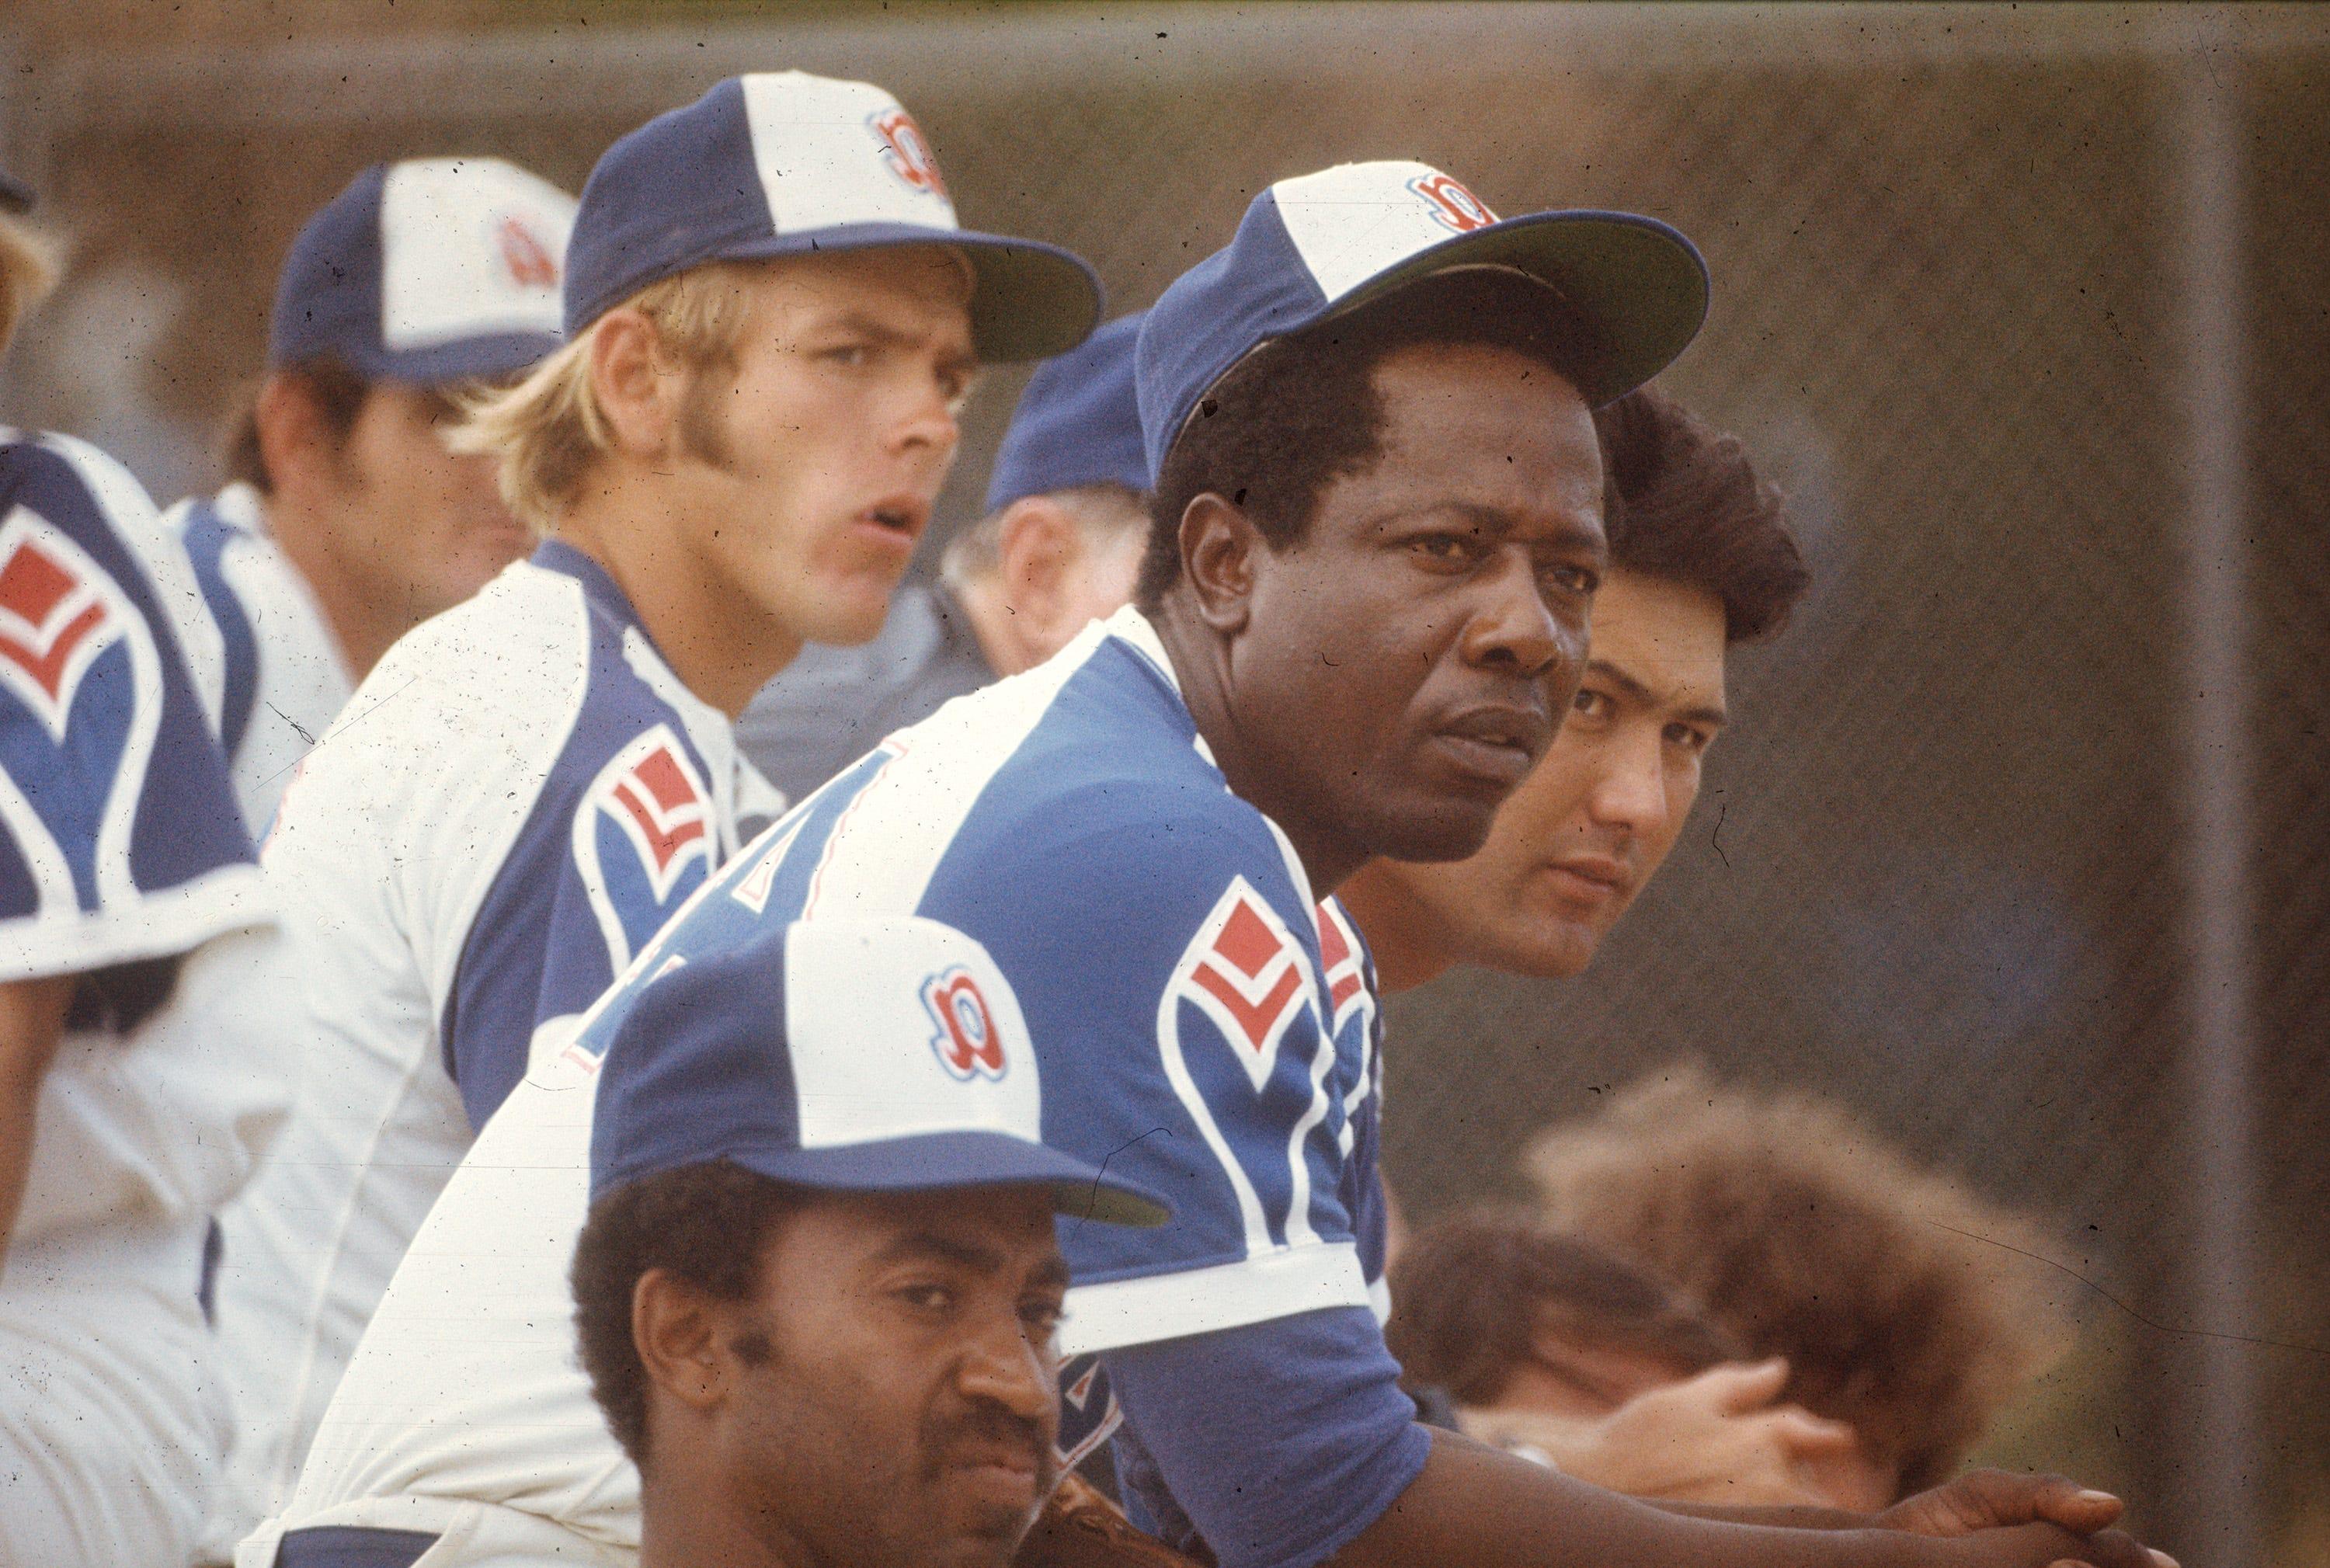 Hank Aaron watches a game from the dugout. / Guy Ferrell / The Palm Beach Post